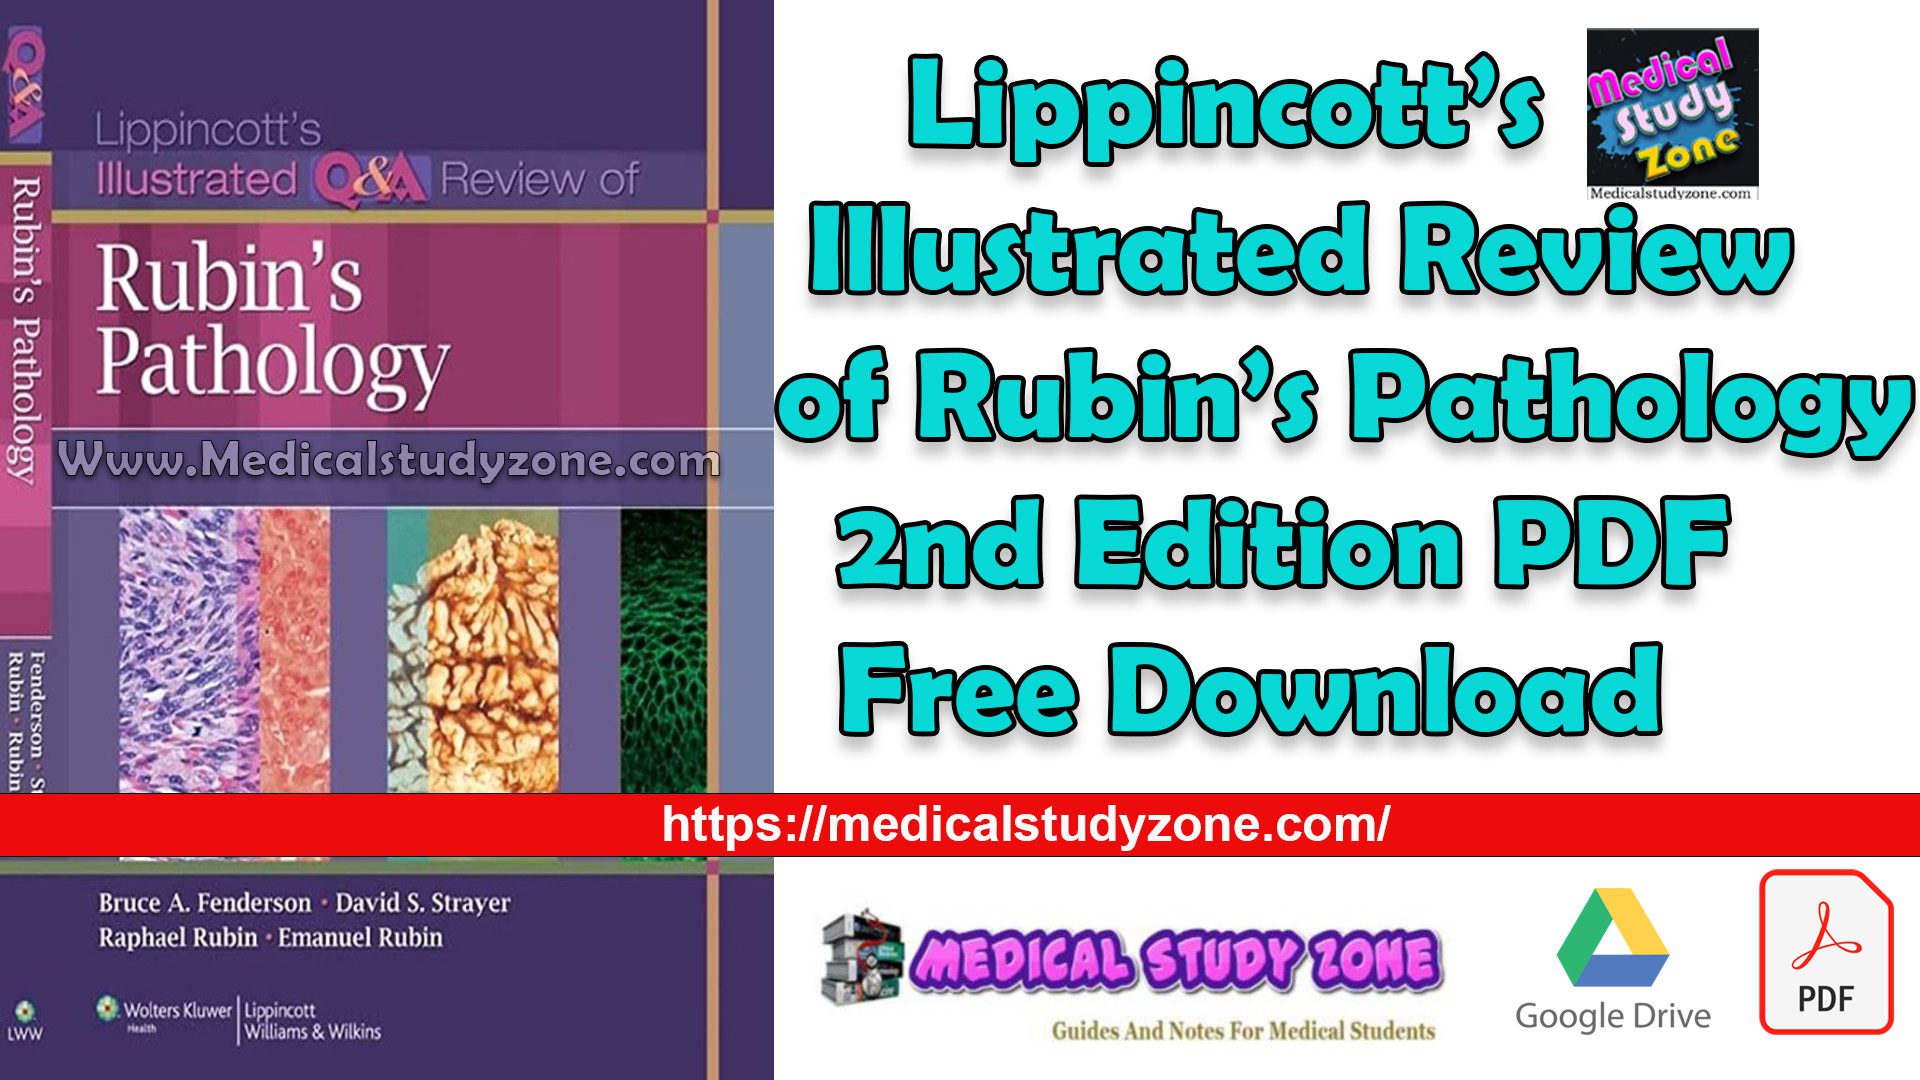 lippincotts illustrated q&a review of rubins pathology free download